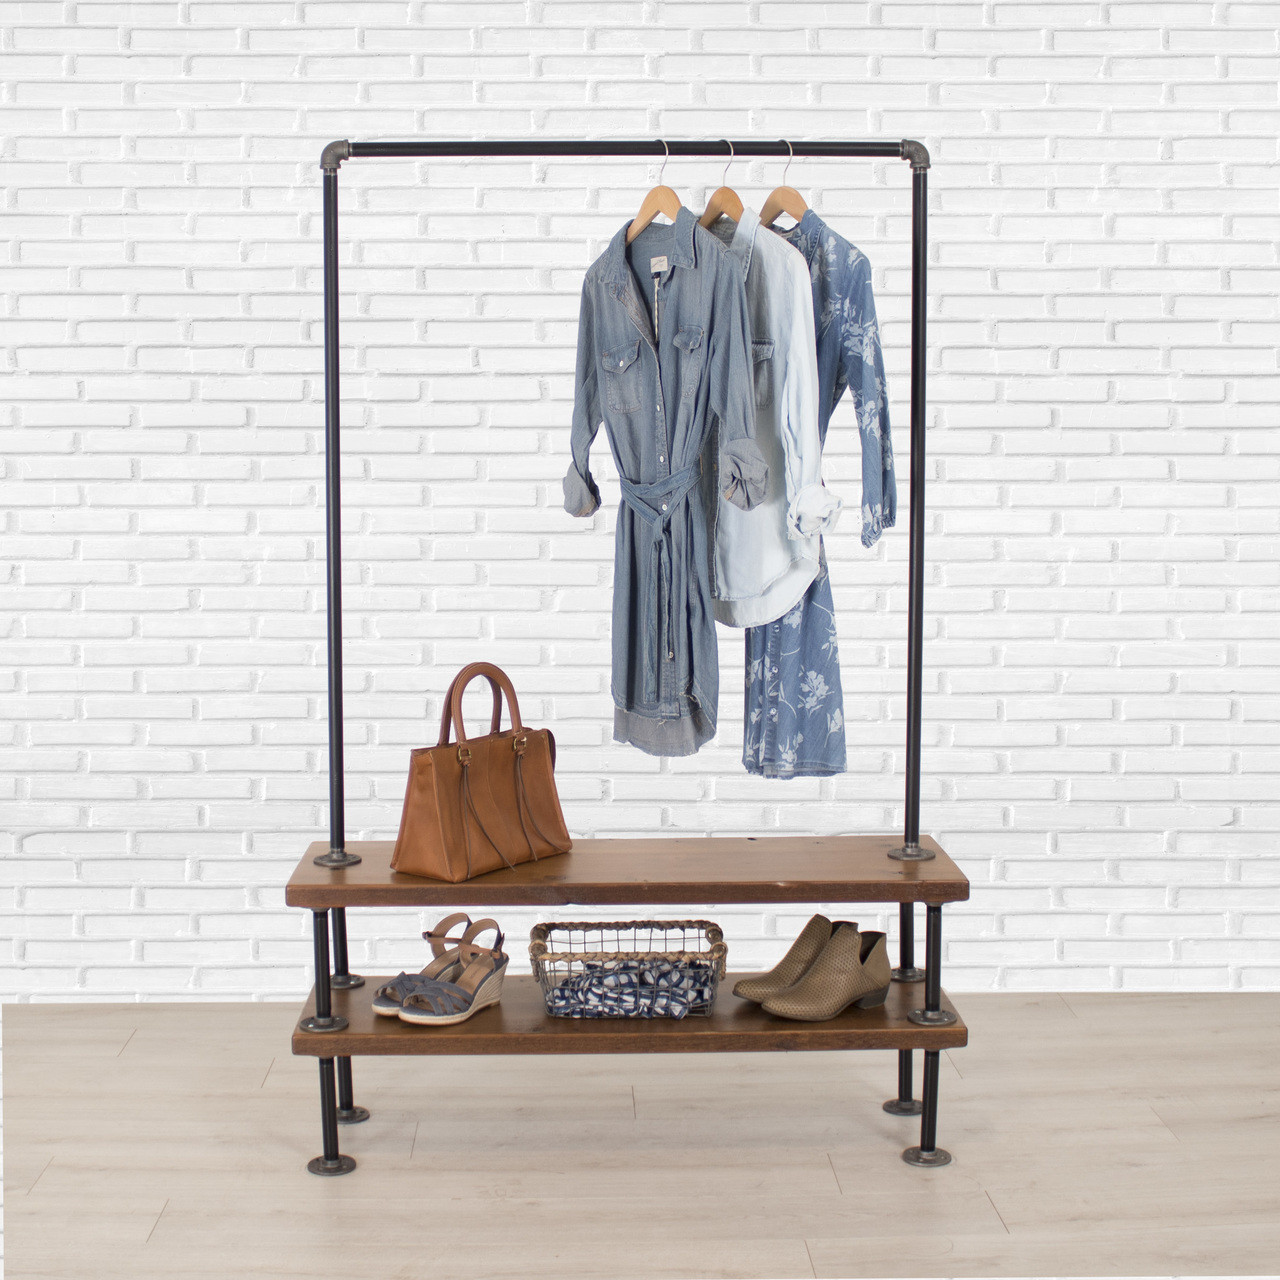 DOUBLE R BAGS Hanging Closet Organizer 6 Shelf and 5 Clothes Drawers G –  Double R Bags